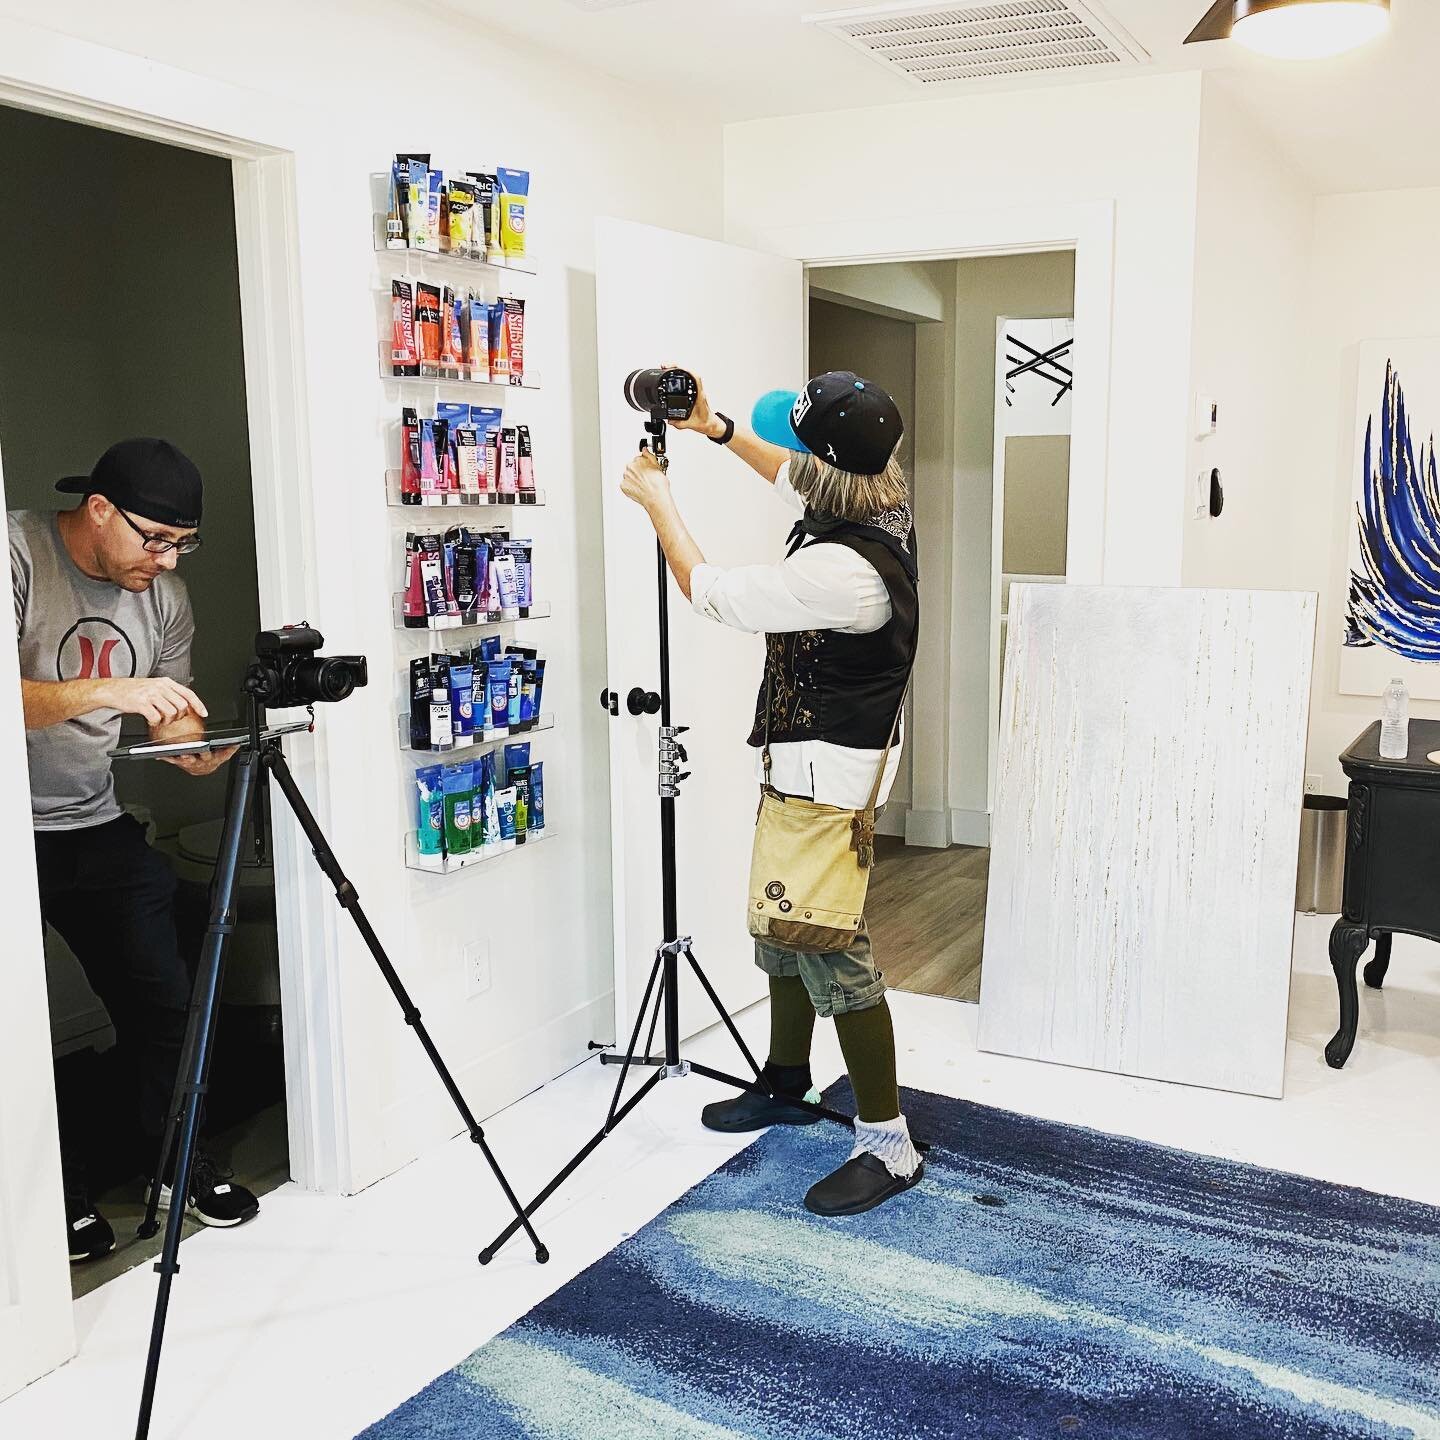 The very talented @joshphillipsphotography &amp; @aggie.sparkle are in the studio this morning!!! 📸

&ldquo;You don't take a photograph, you make it&rdquo; - Ansel Adams

#artistcollaborations #photography #storytelling #photoshoot #artstudio #artis